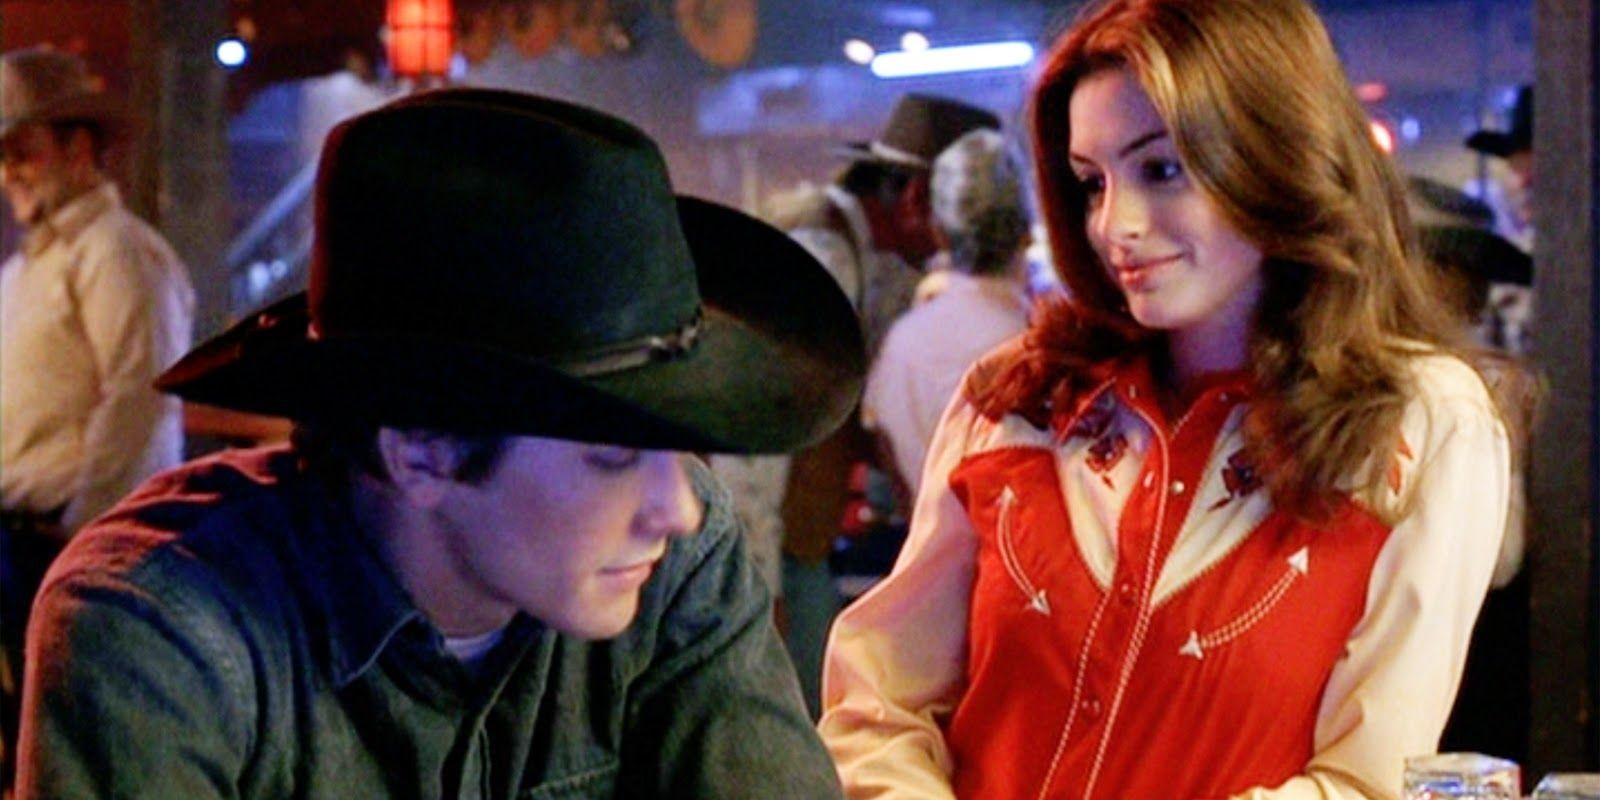 Jake Gyllenhaal and Anne Hathaway at a bar in Brokeback Mountain